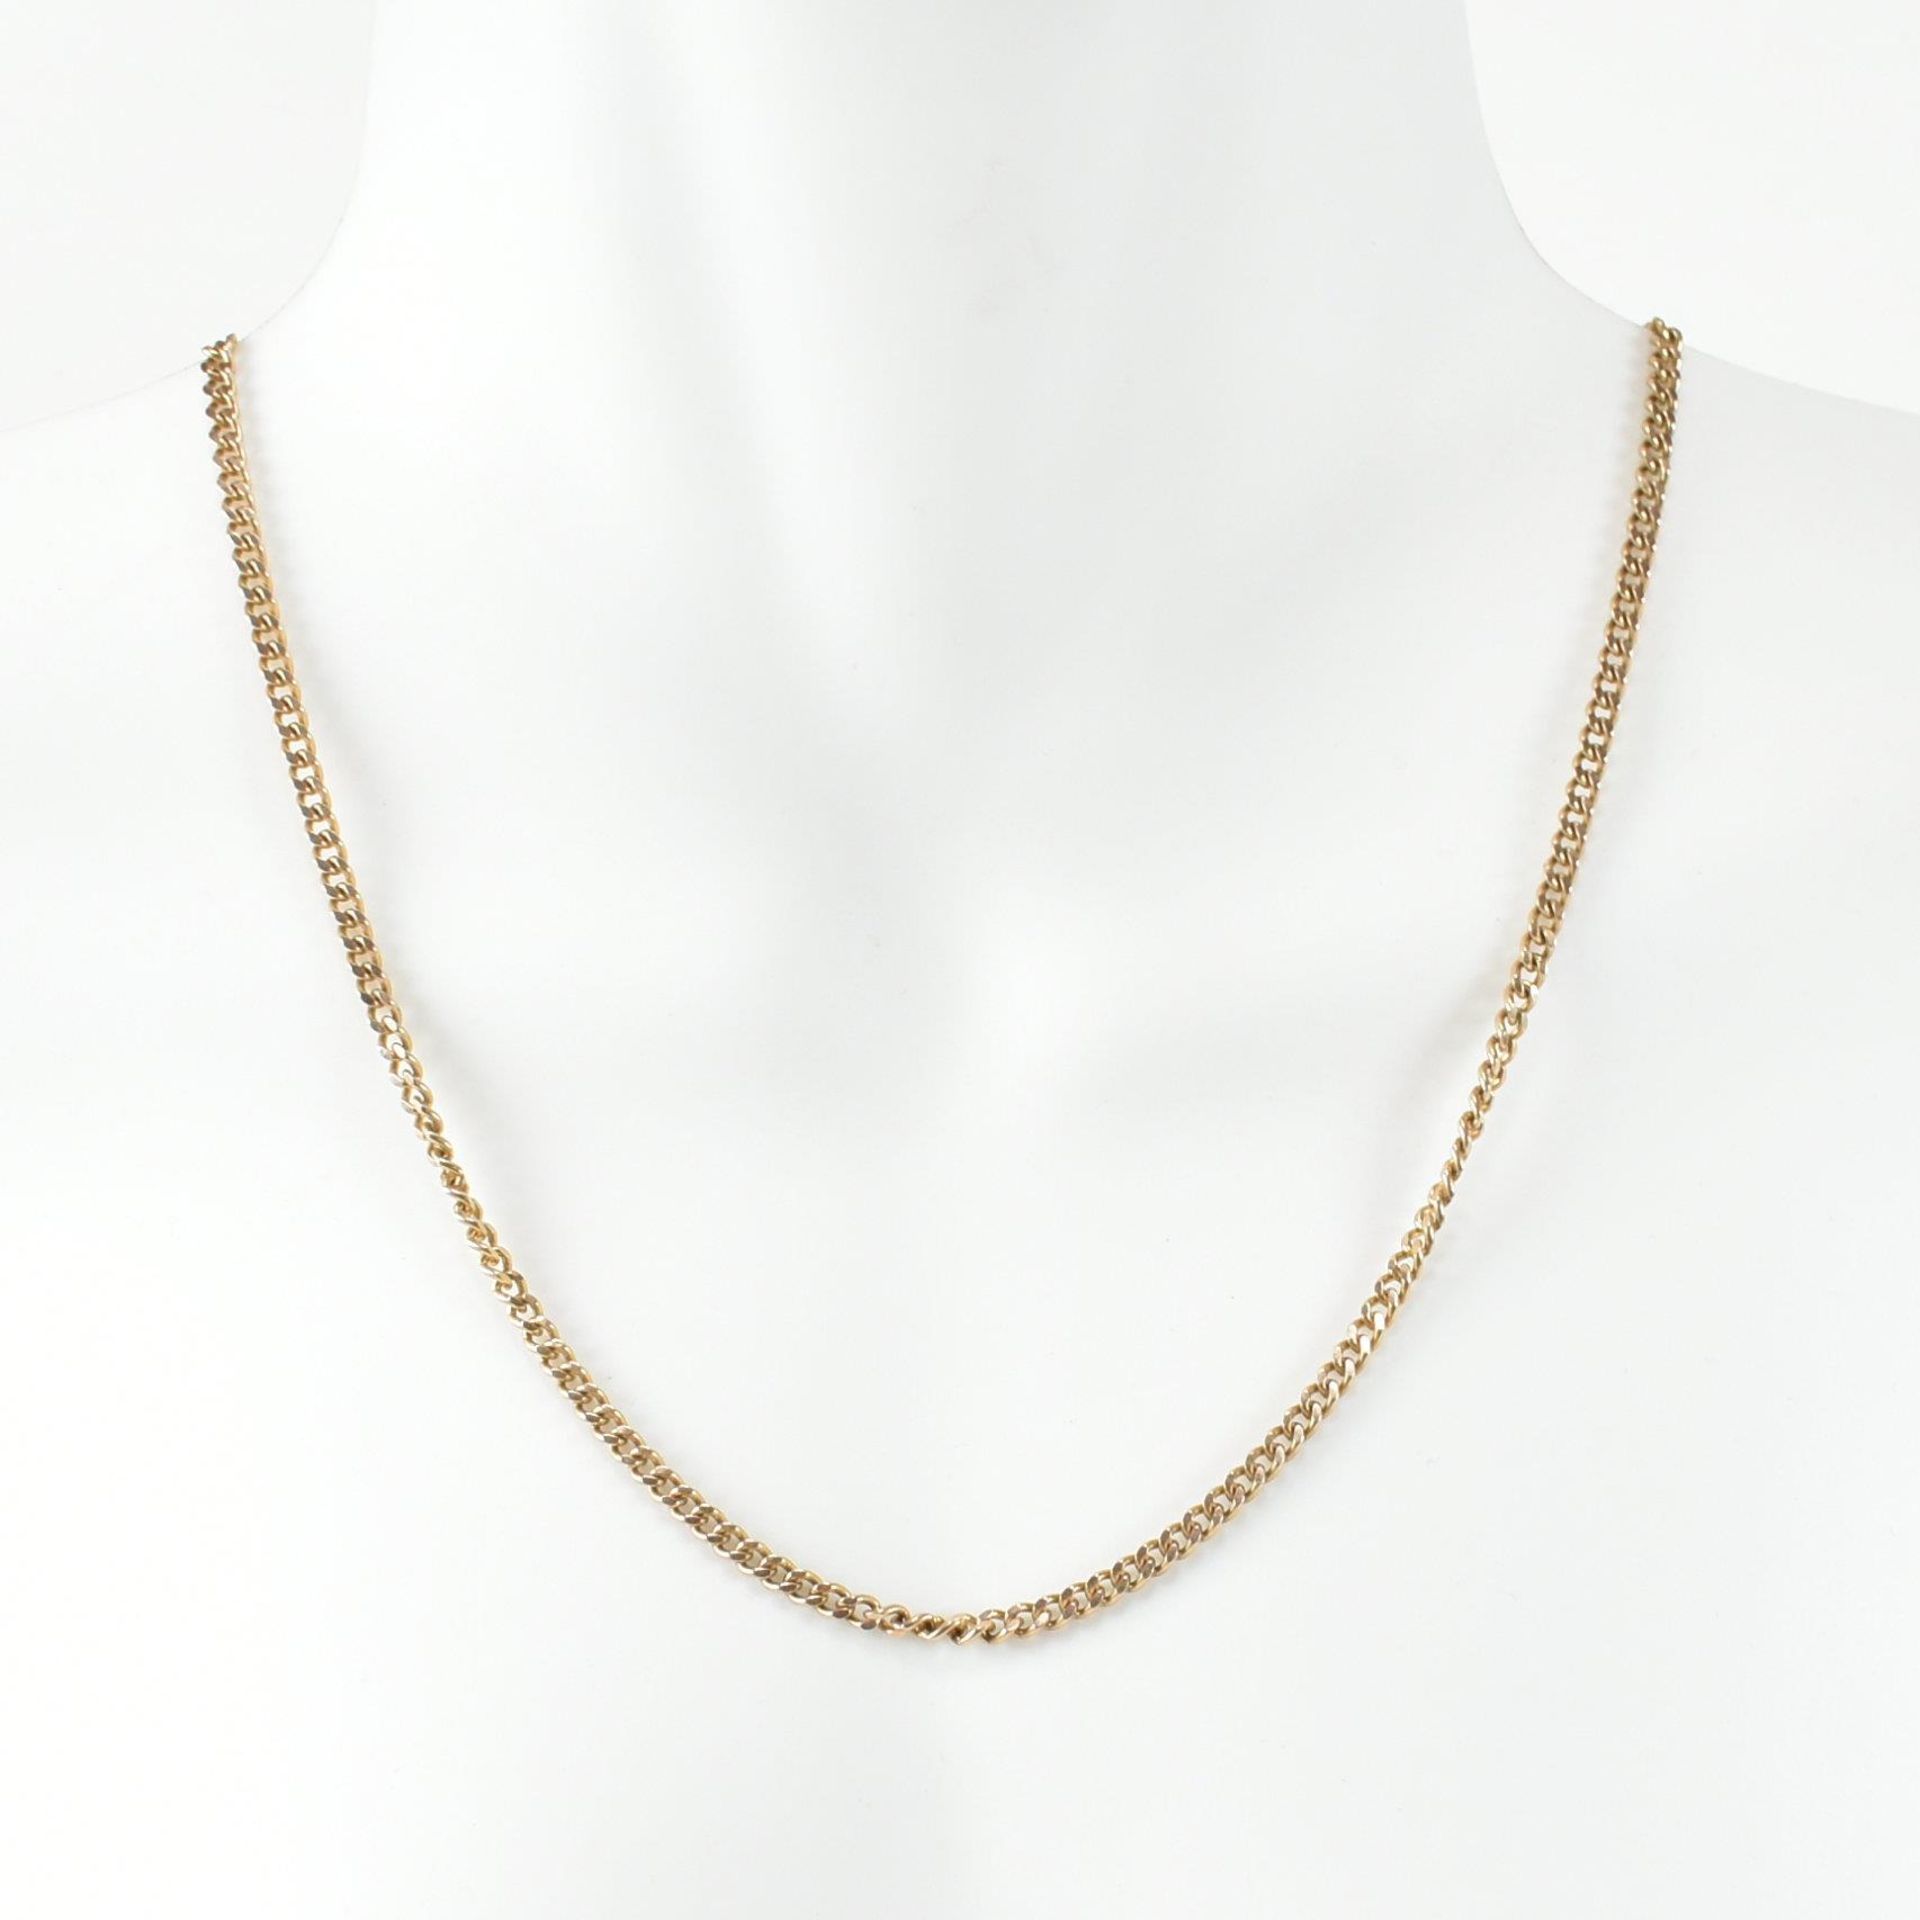 HALLMARKED 9CT GOLD CURB LINK CHAIN NECKLACE - Image 6 of 6